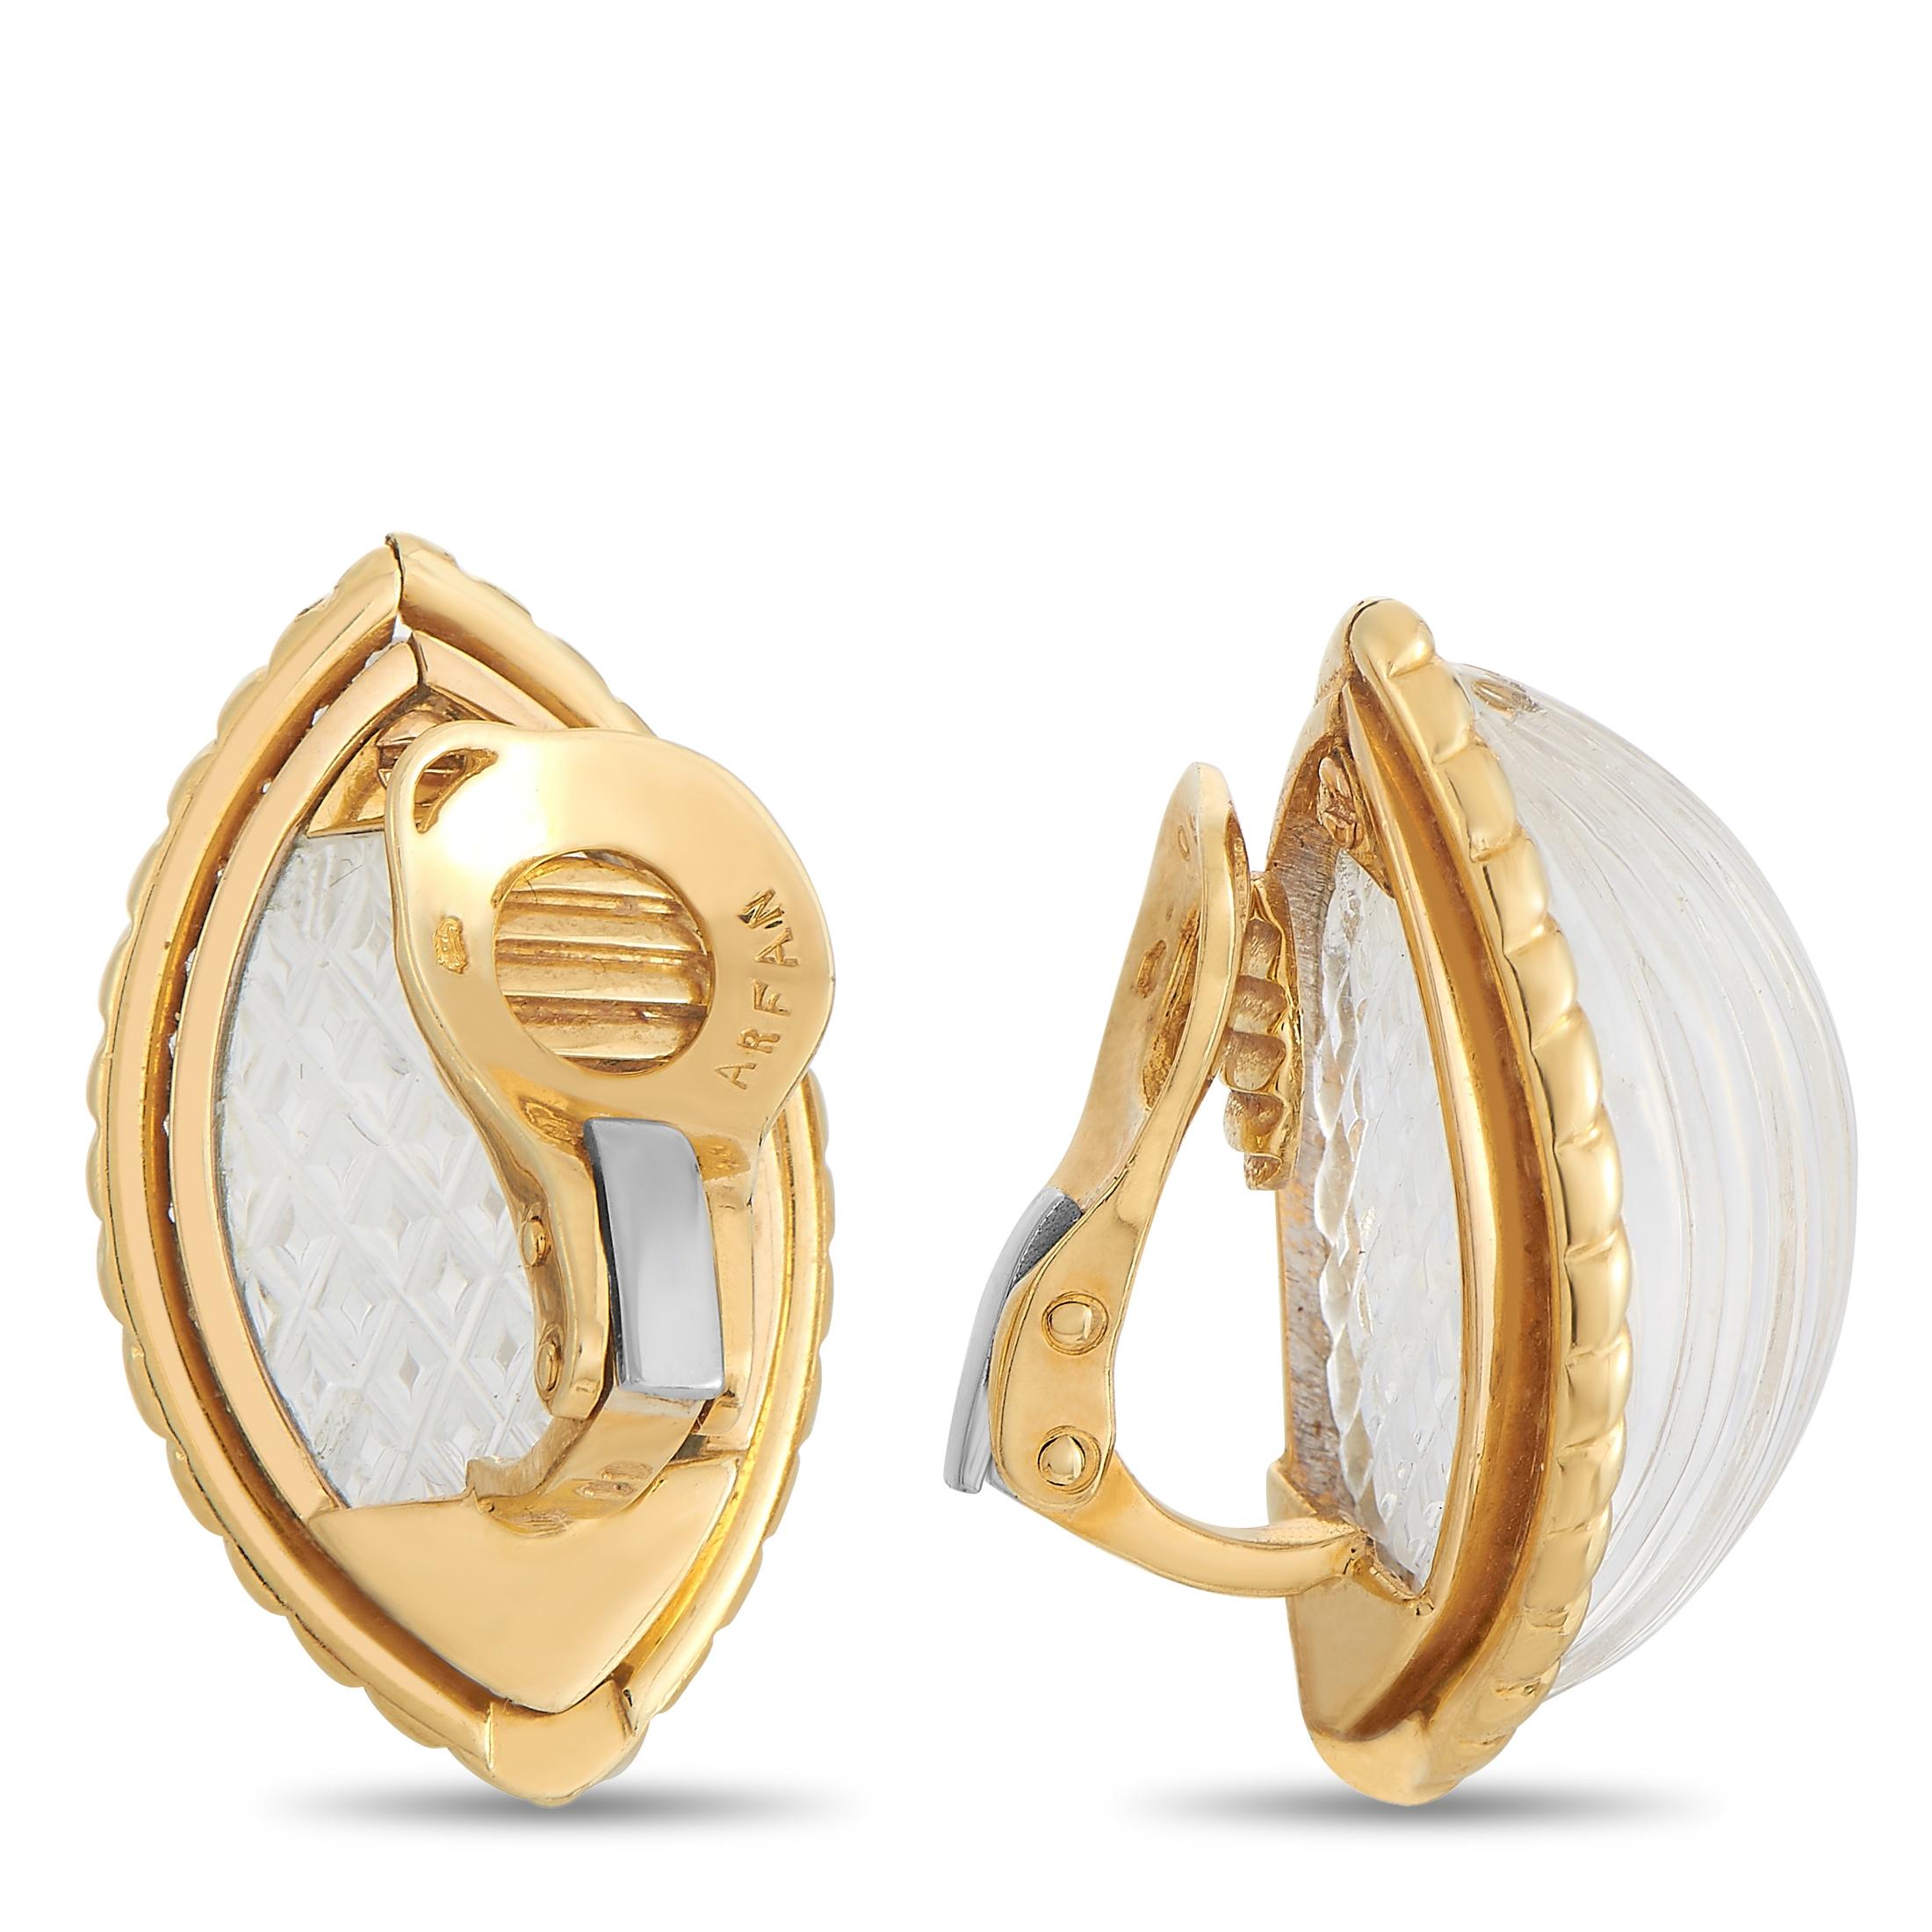 There’s something magical about these classic Arfan earrings. At the center, you’ll find a semi-translucent rock crystal with a textured finish. It’s surrounded by a halo of opulent 18K Yellow Gold, which perfectly frames each intricate gemstone.